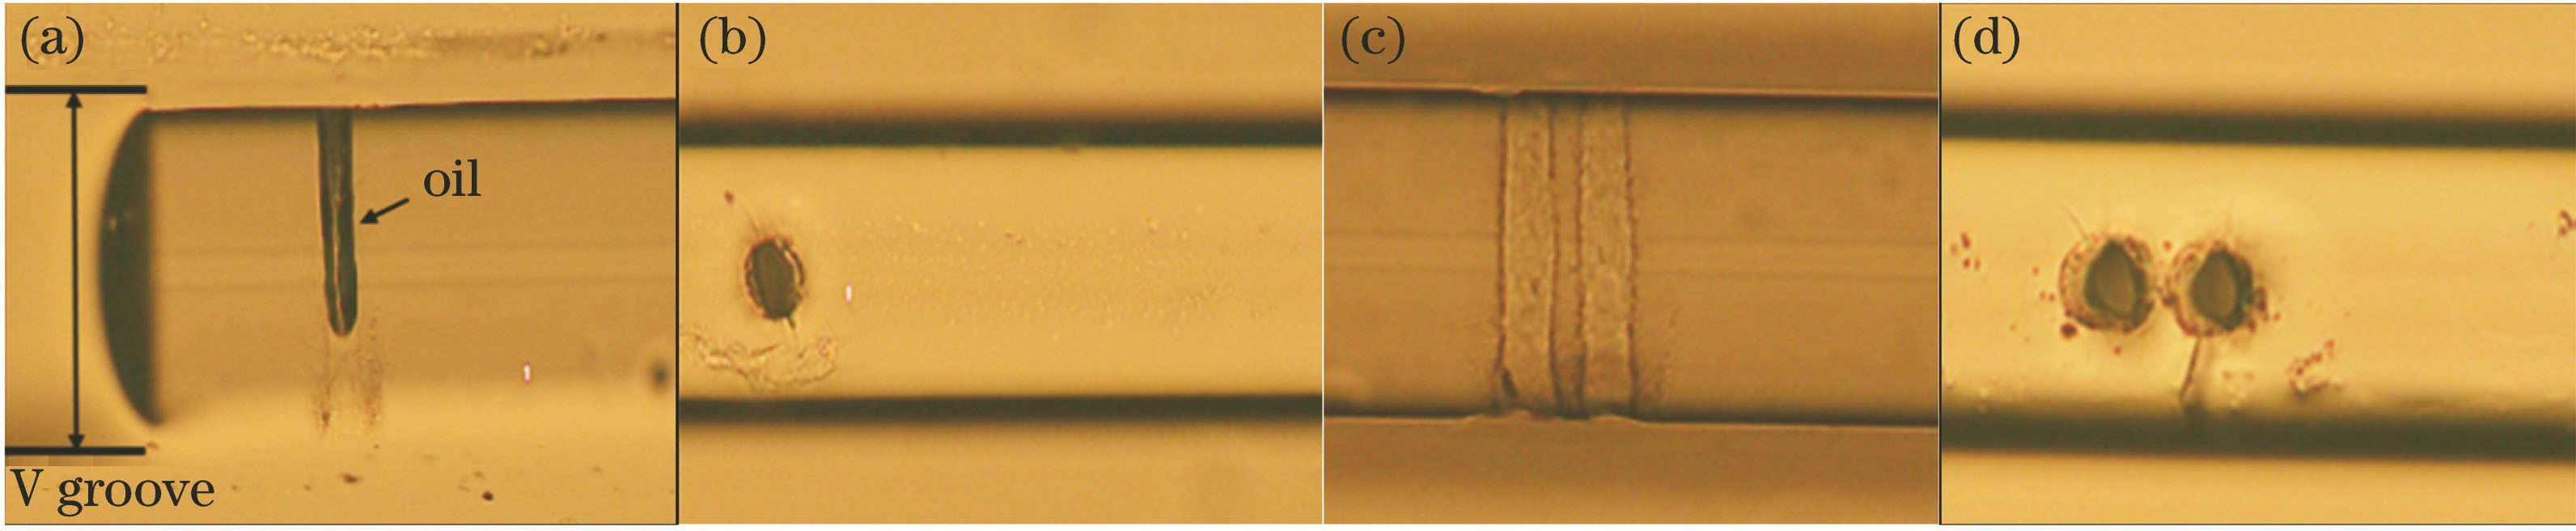 Micrographs of columnar microholes. (a) Side view of single hole; (b) top view of single hole; (c) side view of two holes; (d) top view of two holes